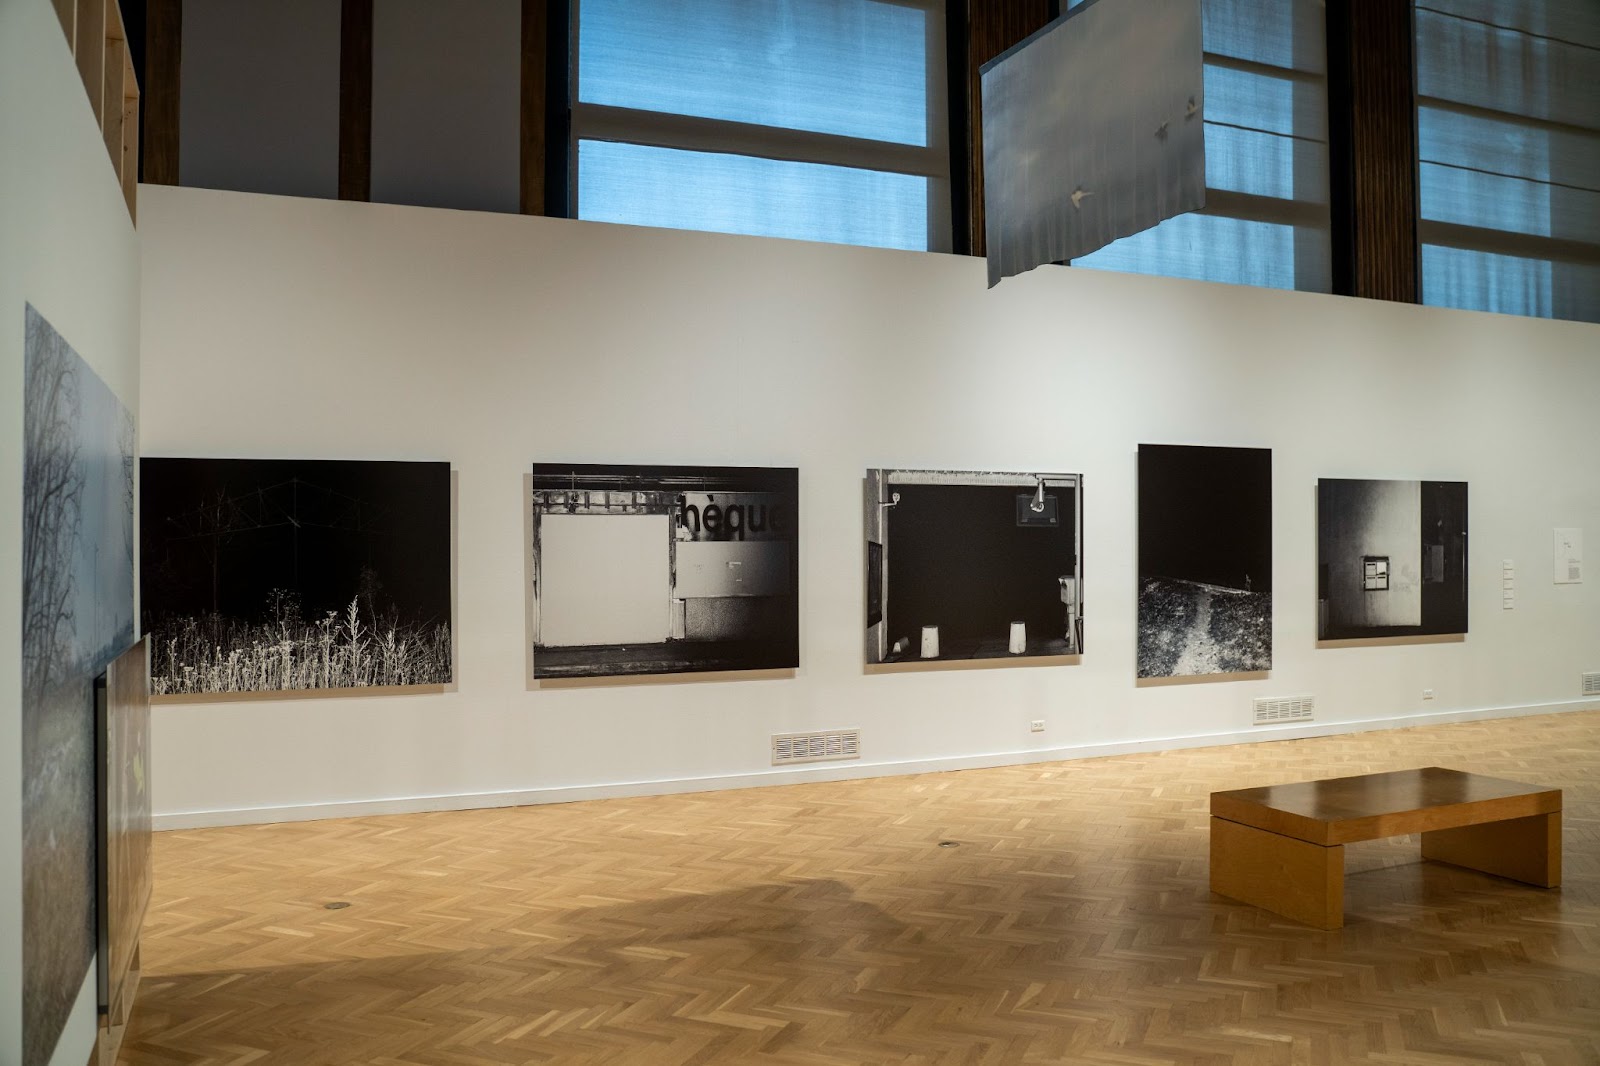 Image: Installation view, Karim Kal, Ligne Dée (2017). Five large black-and-white photographs with images of and around stations on the outskirts of Paris. Above, one of Rebecca Topakian’s silk flags is hung from the ceiling. On the adjacent left wall is a glimpse of Gilberto Guïza-Rojas’ collages. Courtesy of Villa Albertine.